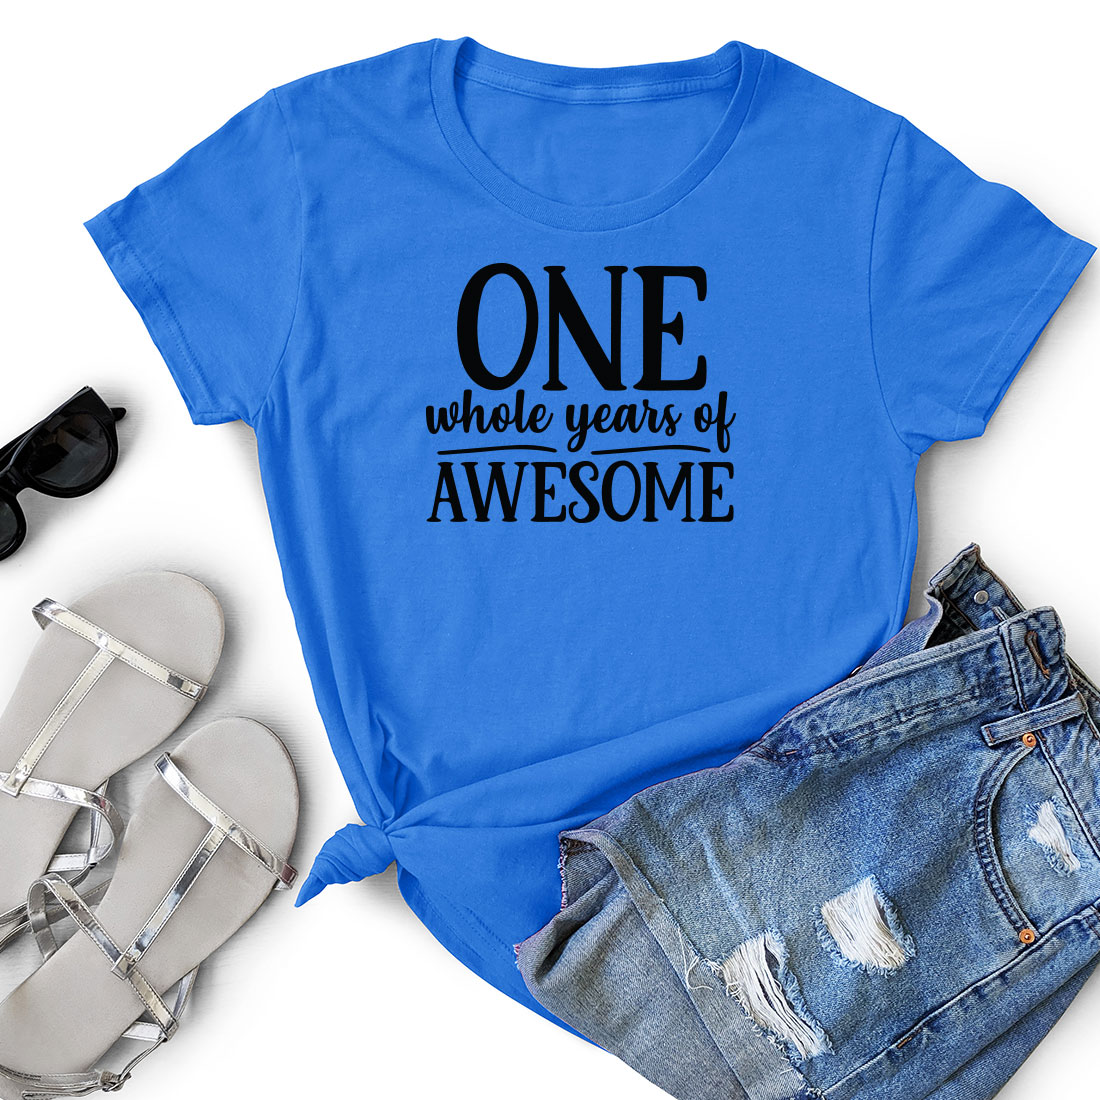 T - shirt that says one whole year of awesome.